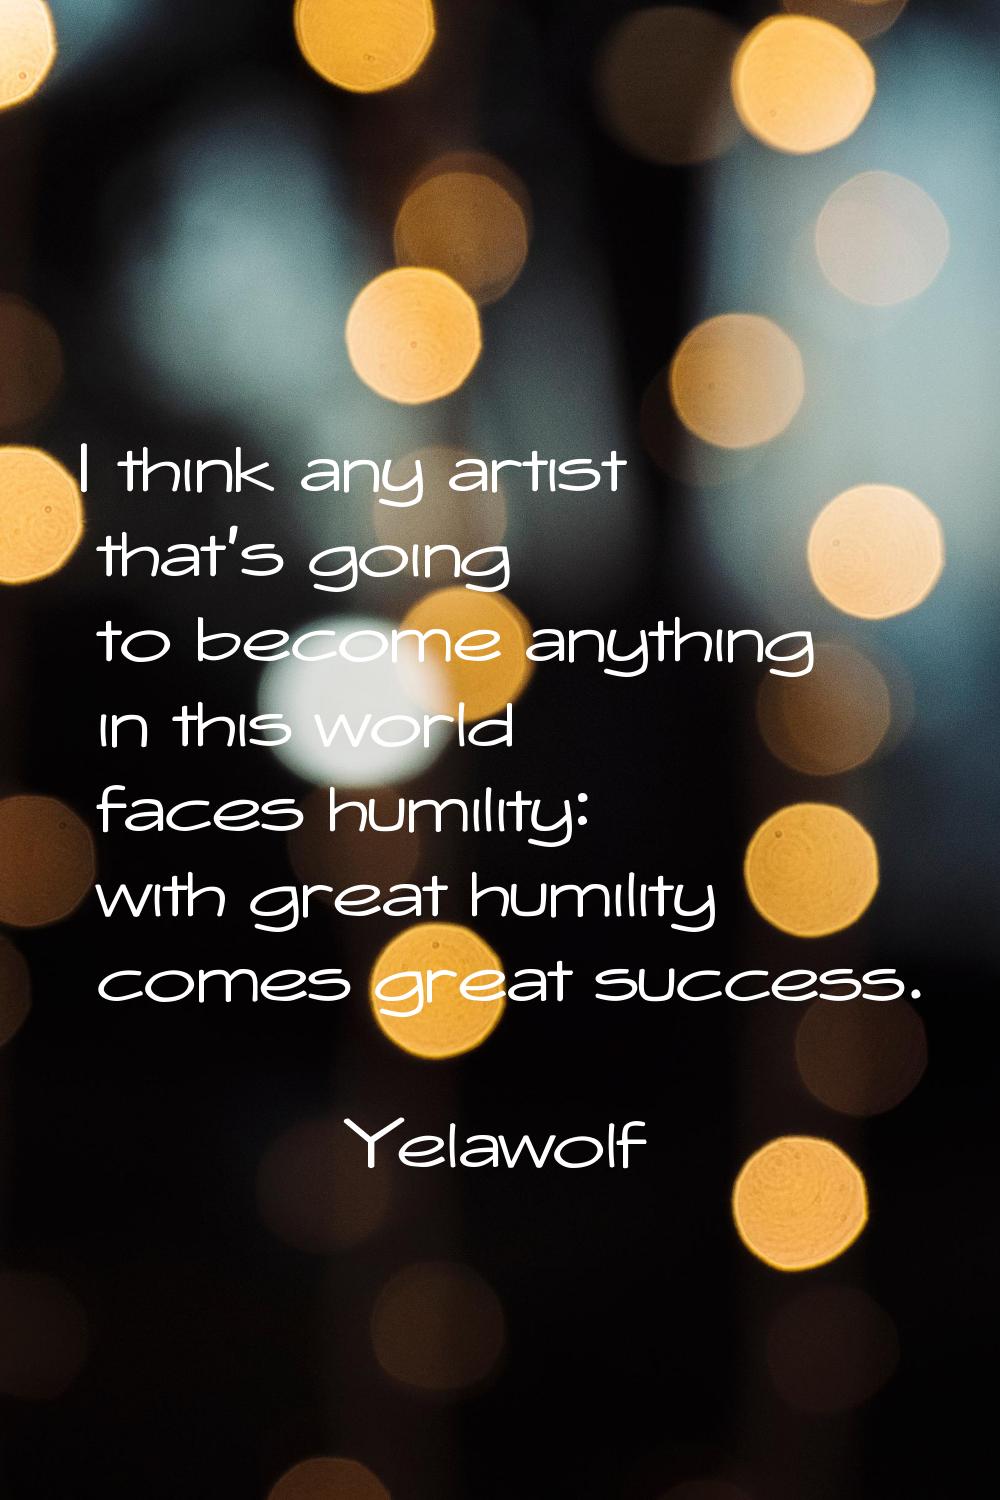 I think any artist that's going to become anything in this world faces humility: with great humilit